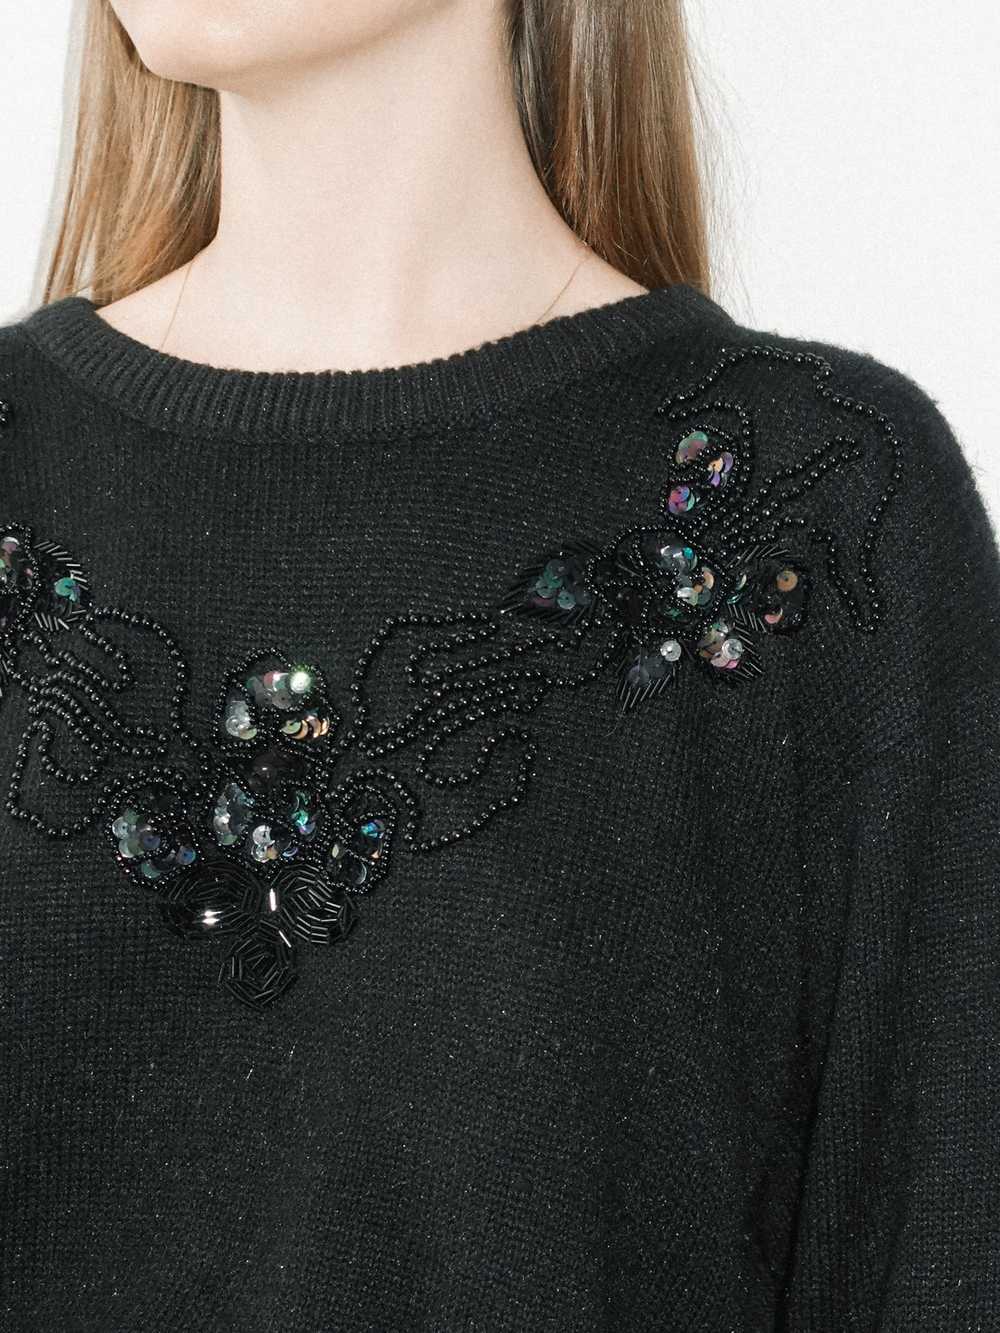 Black Knit Sweater With Beaded Sequin Detail - image 2